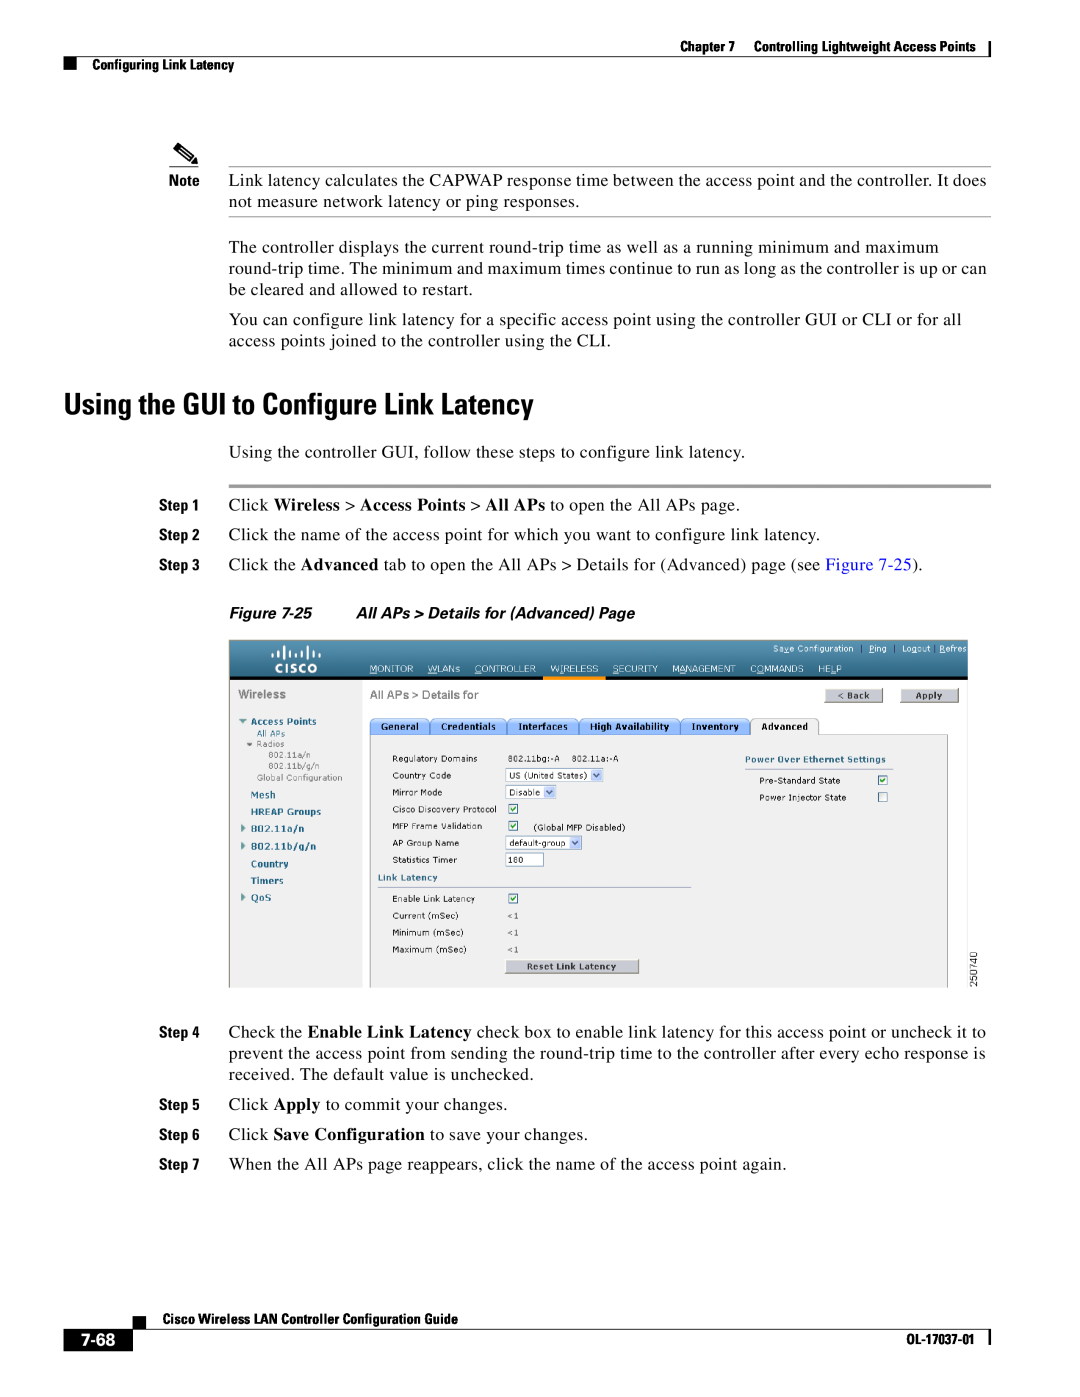 Cisco Systems OL-17037-01 manual Using the GUI to Configure Link Latency, 7-68, 25 All APs Details for Advanced Page 